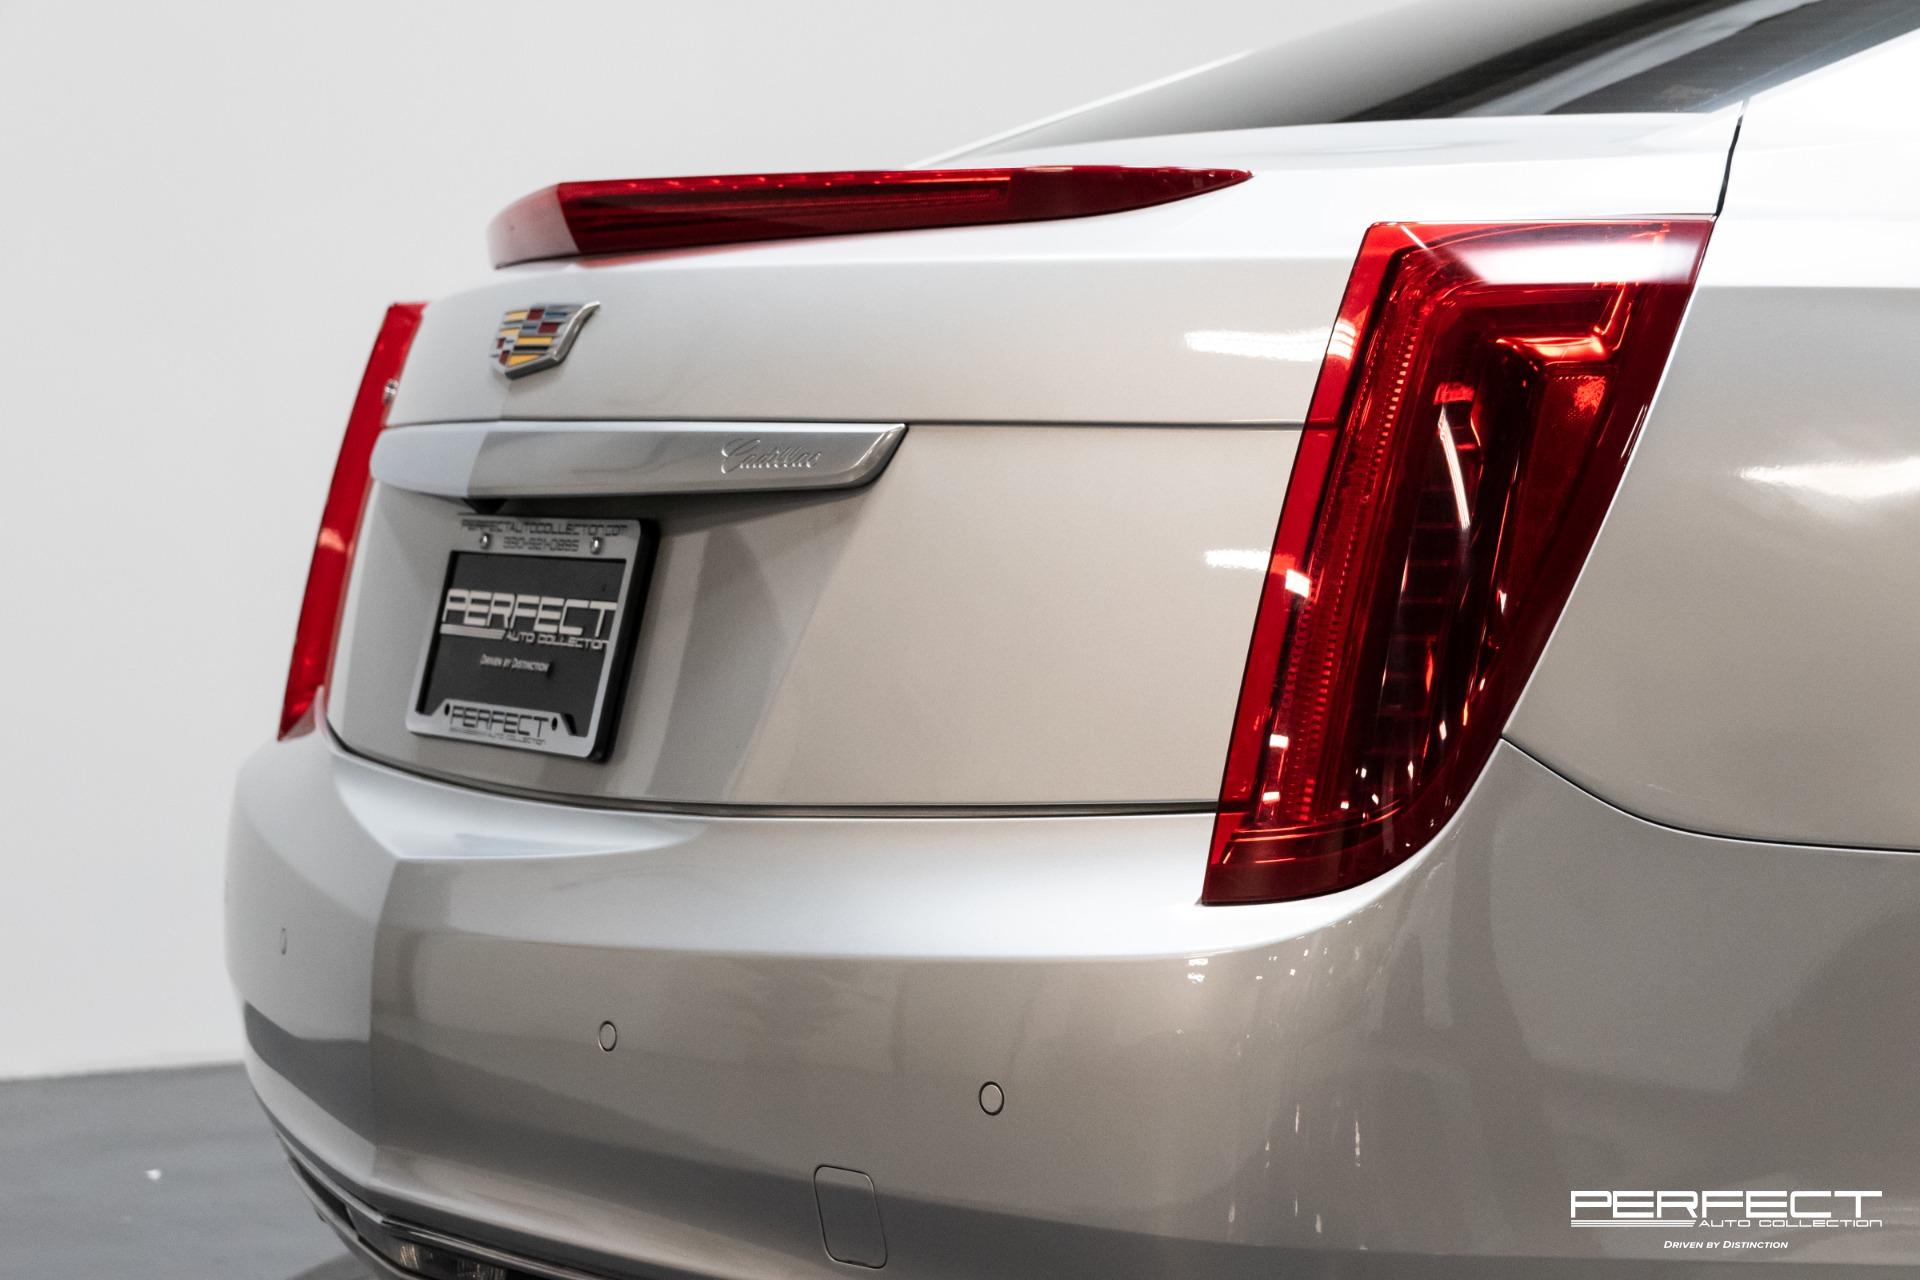 Used 2016 Cadillac XTS Luxury Sale For #FA537708B | Stock Collection Perfect Auto (Sold)